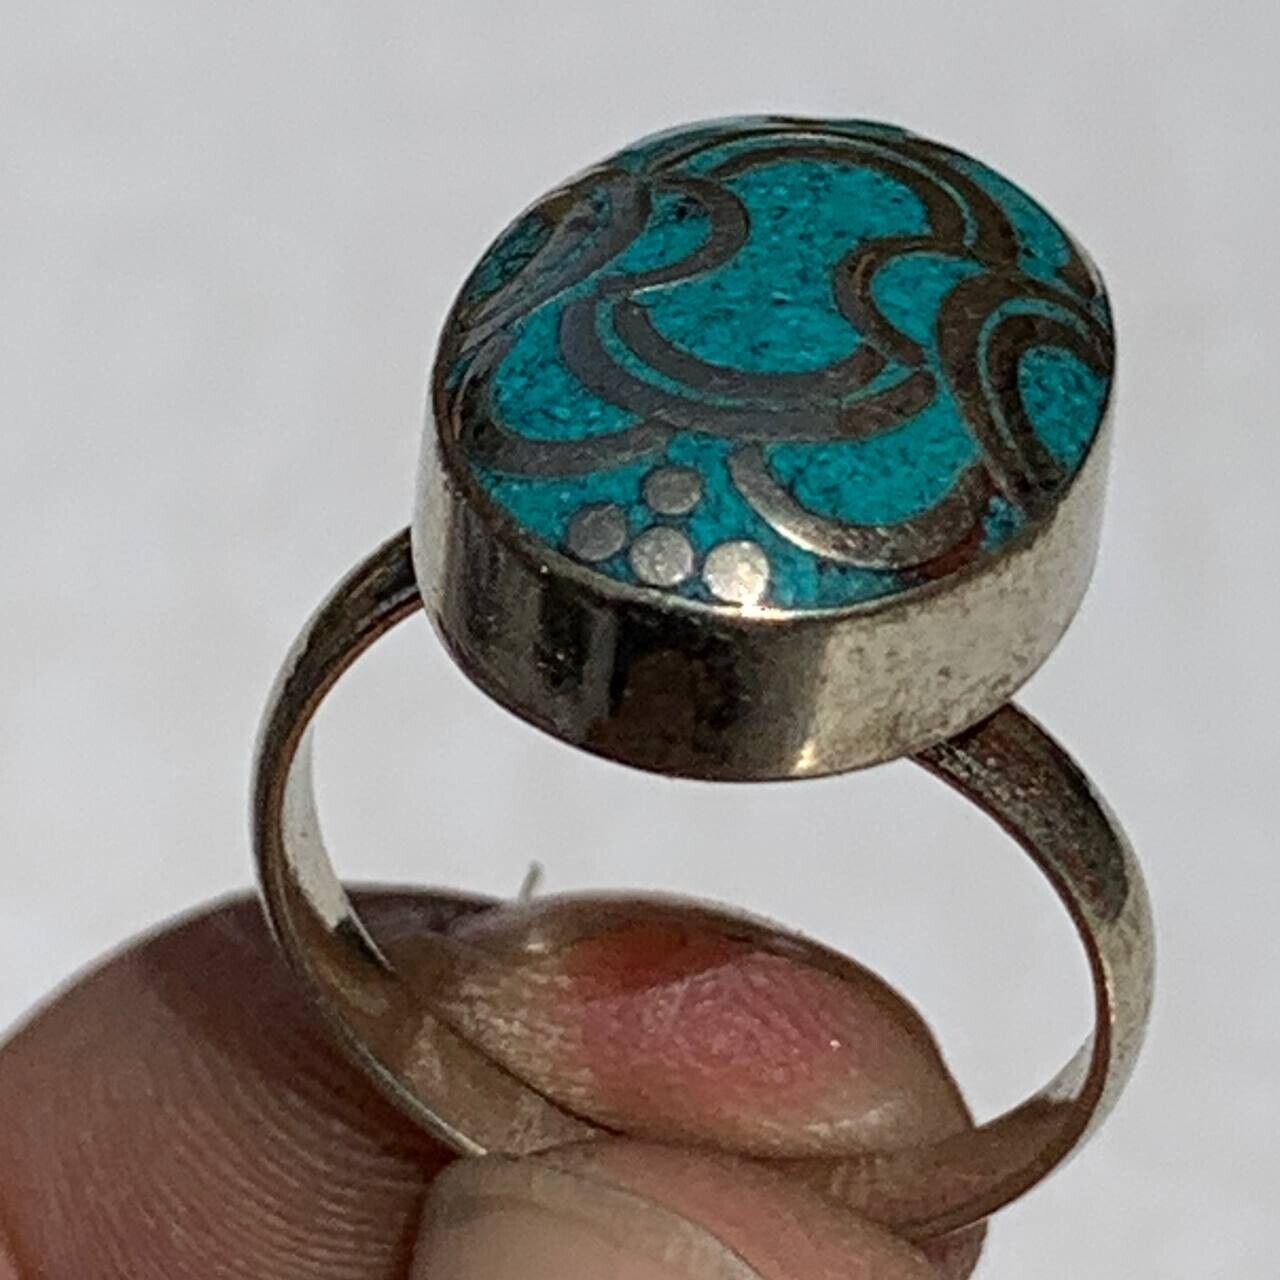 RARE ANCIENT MEDIEVAL ROMAN SILVER WARRIOR TURQUOISE RING STONE